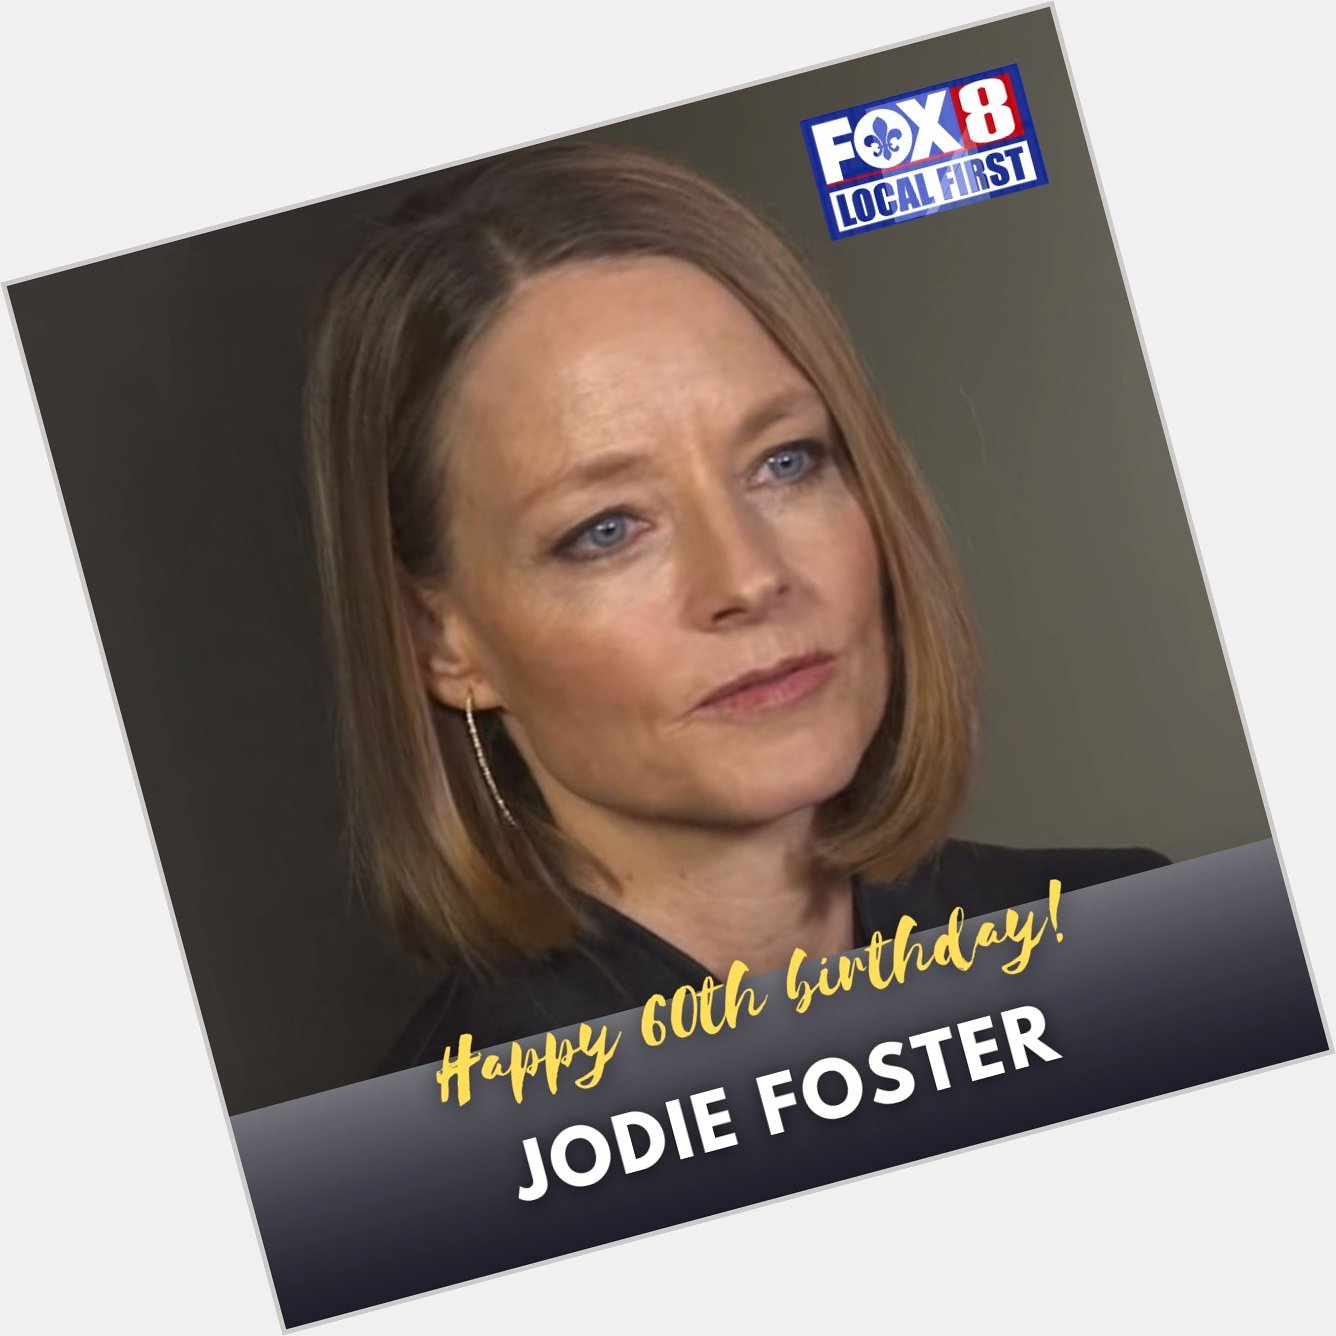 Happy birthday to Jodie Foster, who turned 60 today! 